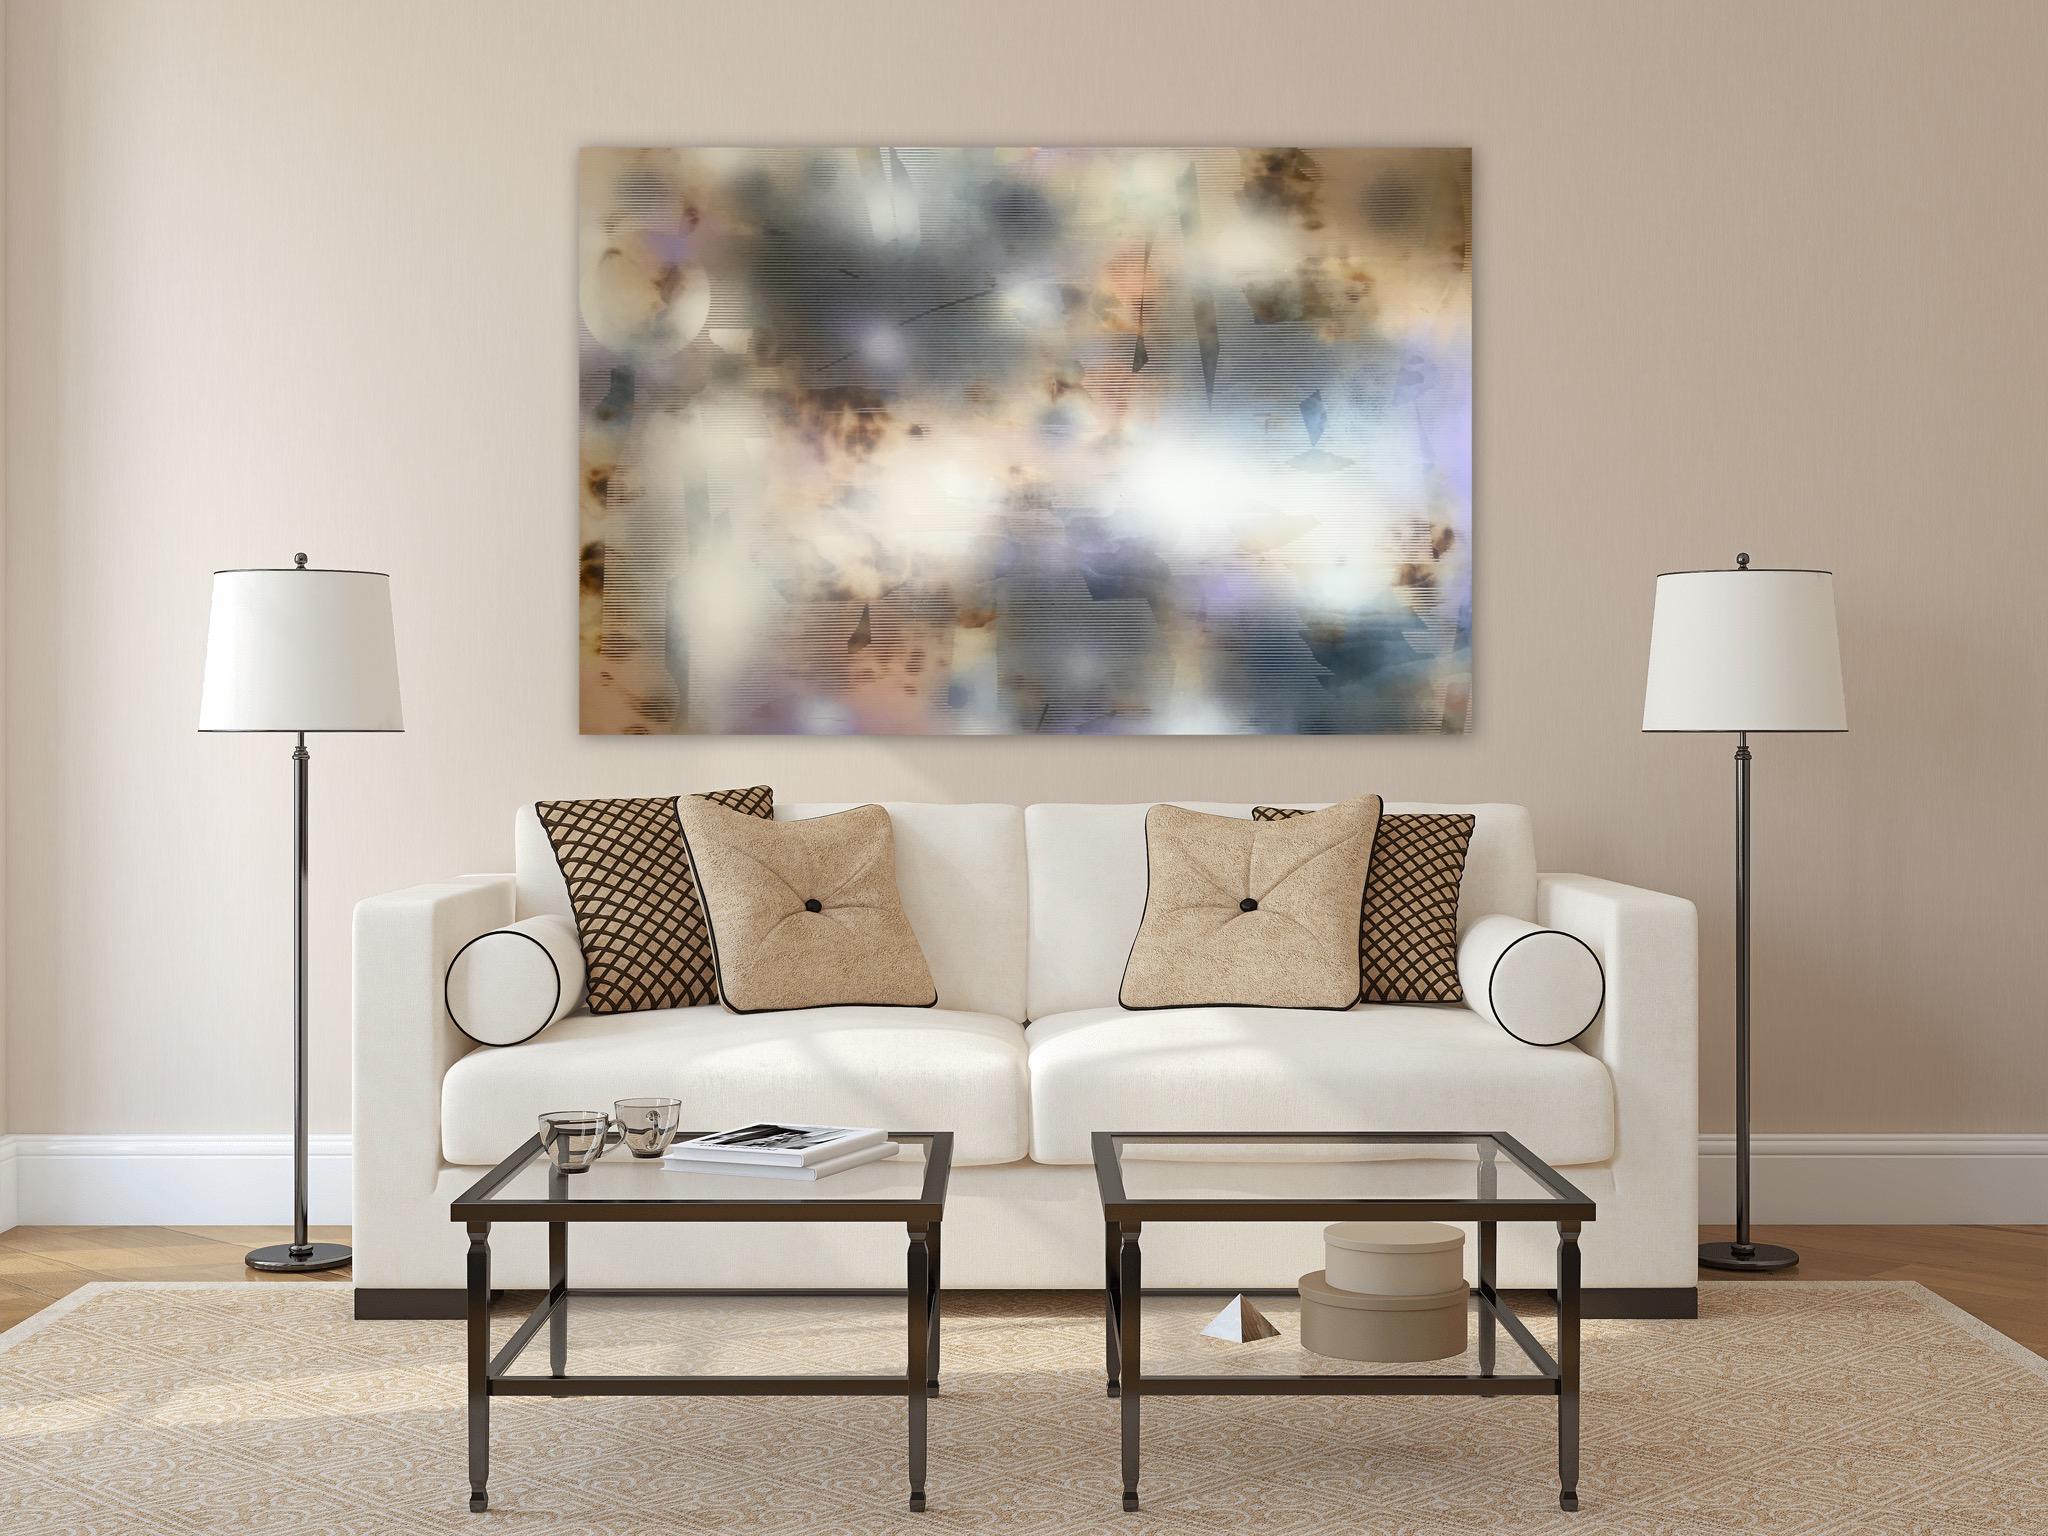 Turbulence 13 (grid painting abstract wood contemporary neutrals atmospheric art 1